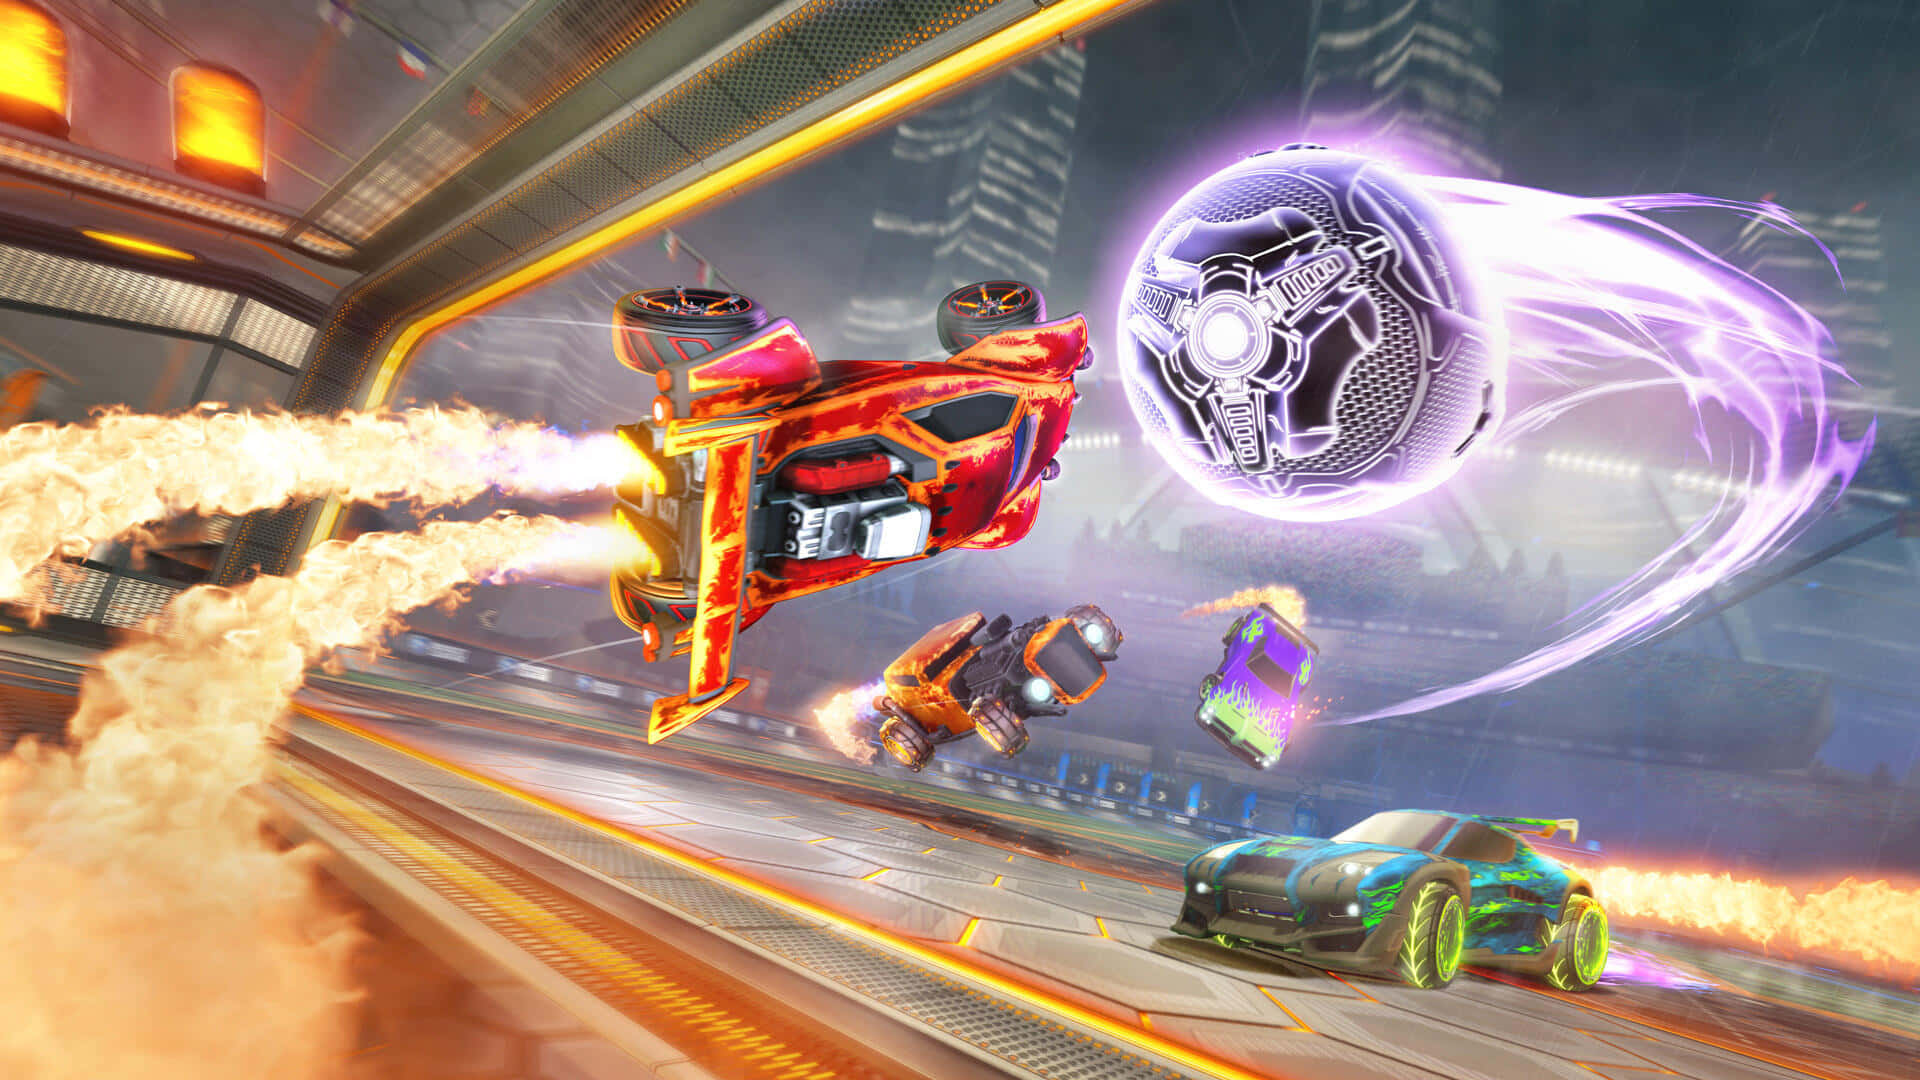 Boost up your game with Rocket League in stunning 1080p